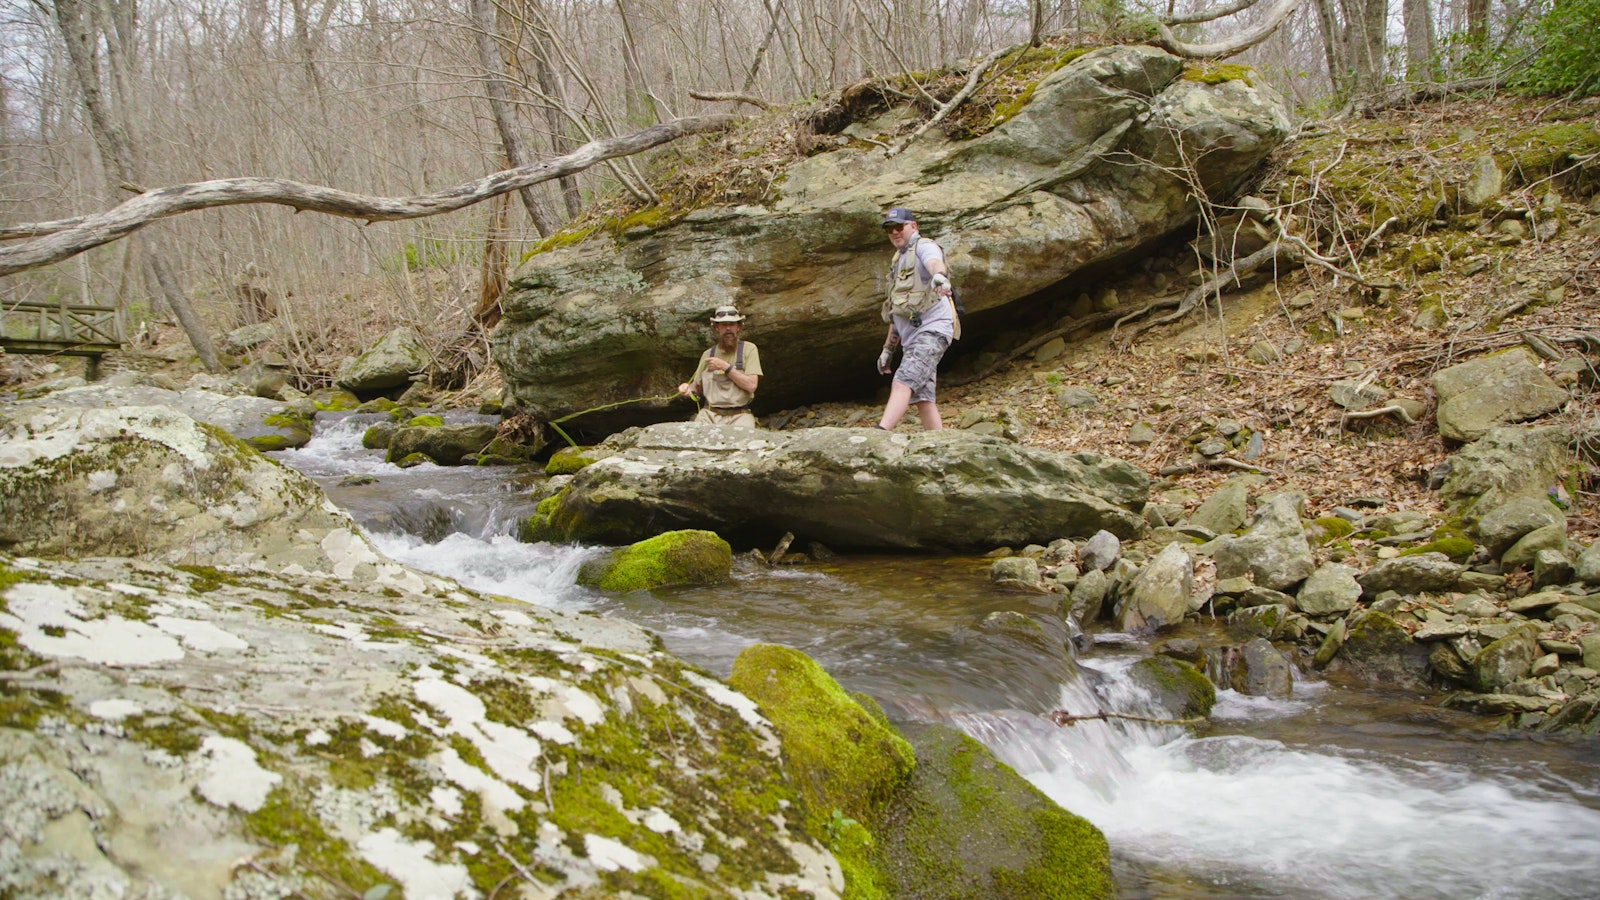 Two people stand on the side of a rocky creek